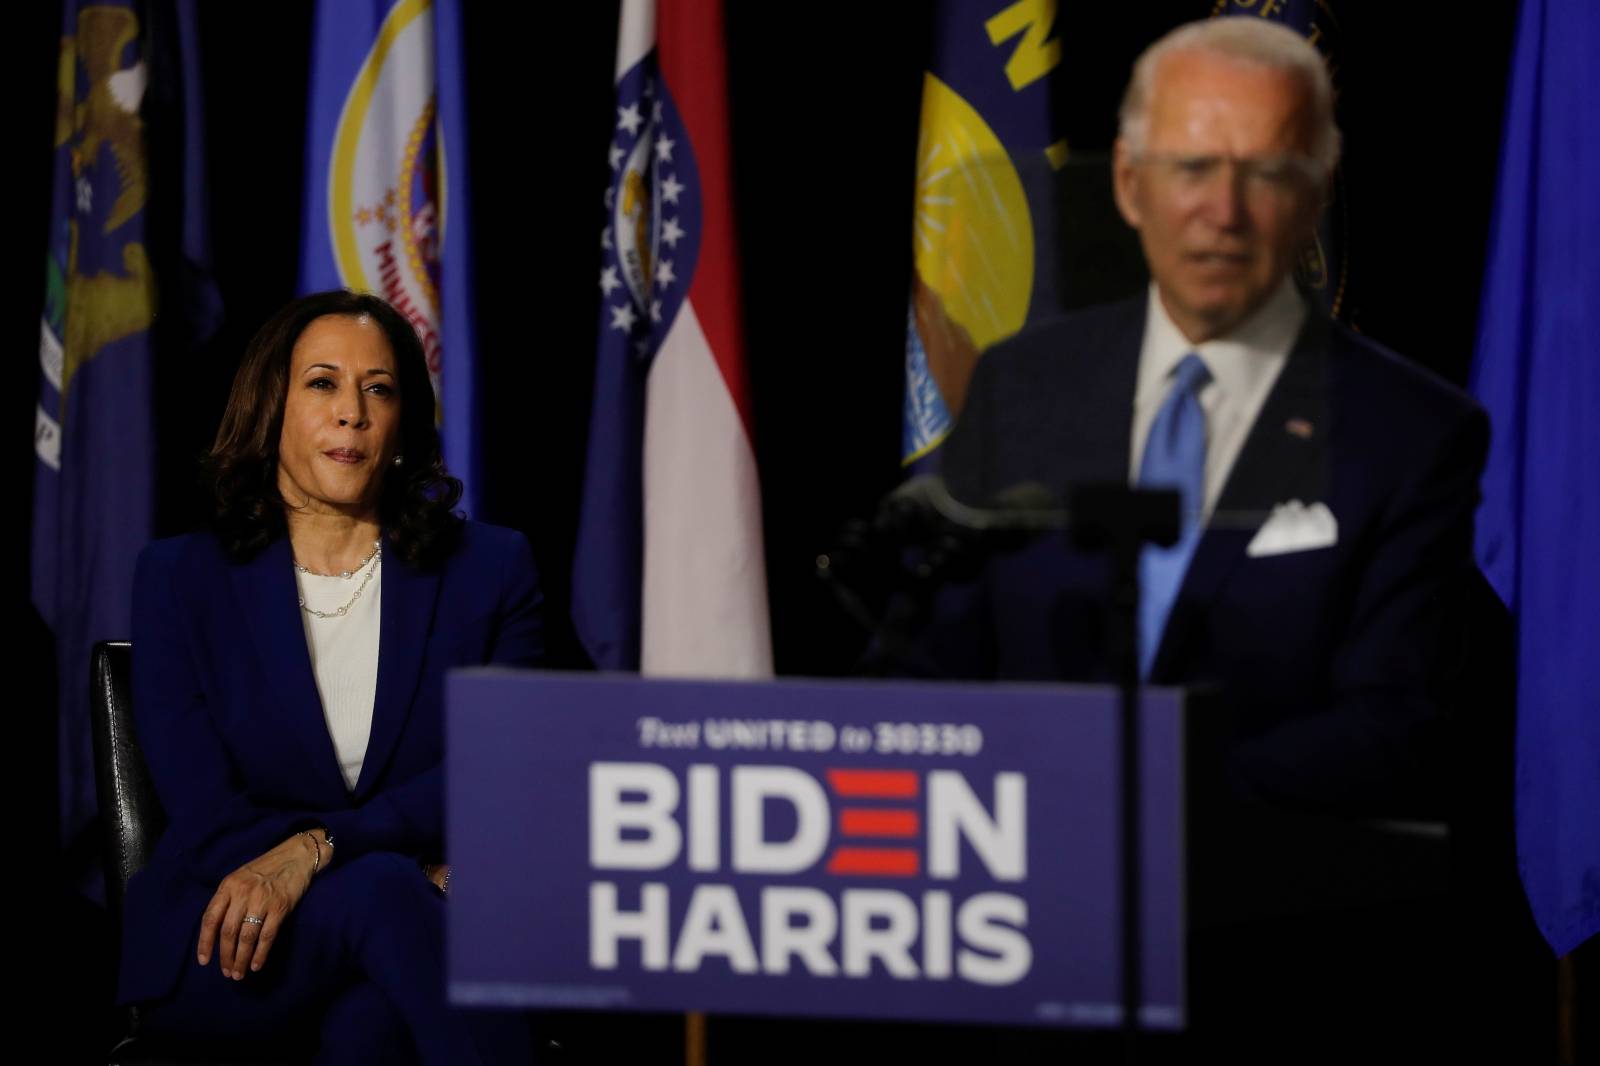 Democratic presidential candidate Biden and vice presidential candidate Harris hold first joint campaign appearance as a ticket in Wilmington, Delaware